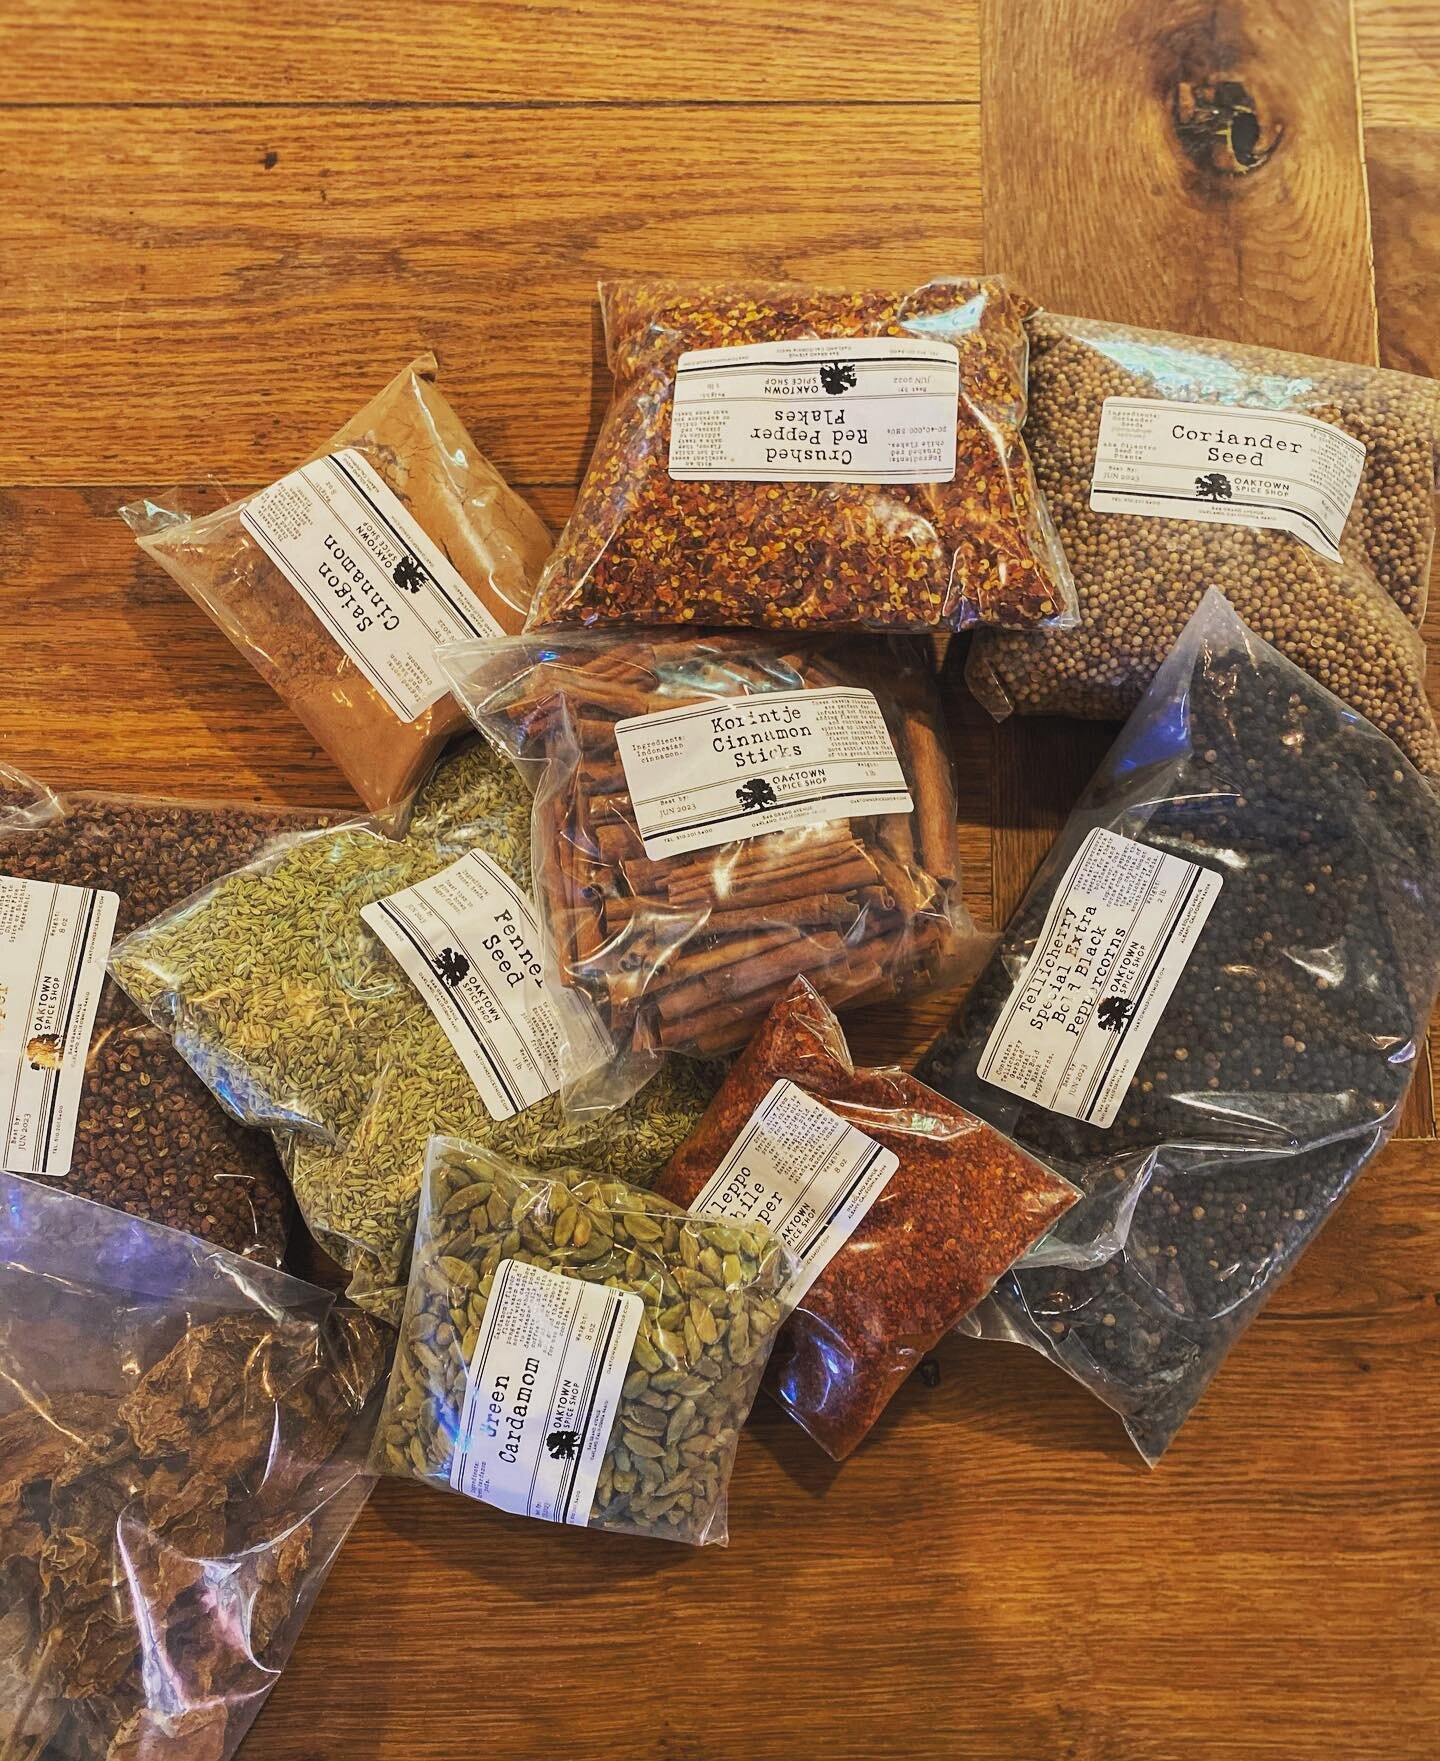 I want to swim in spices (maybe not the chilies though....)! @oaktownspice